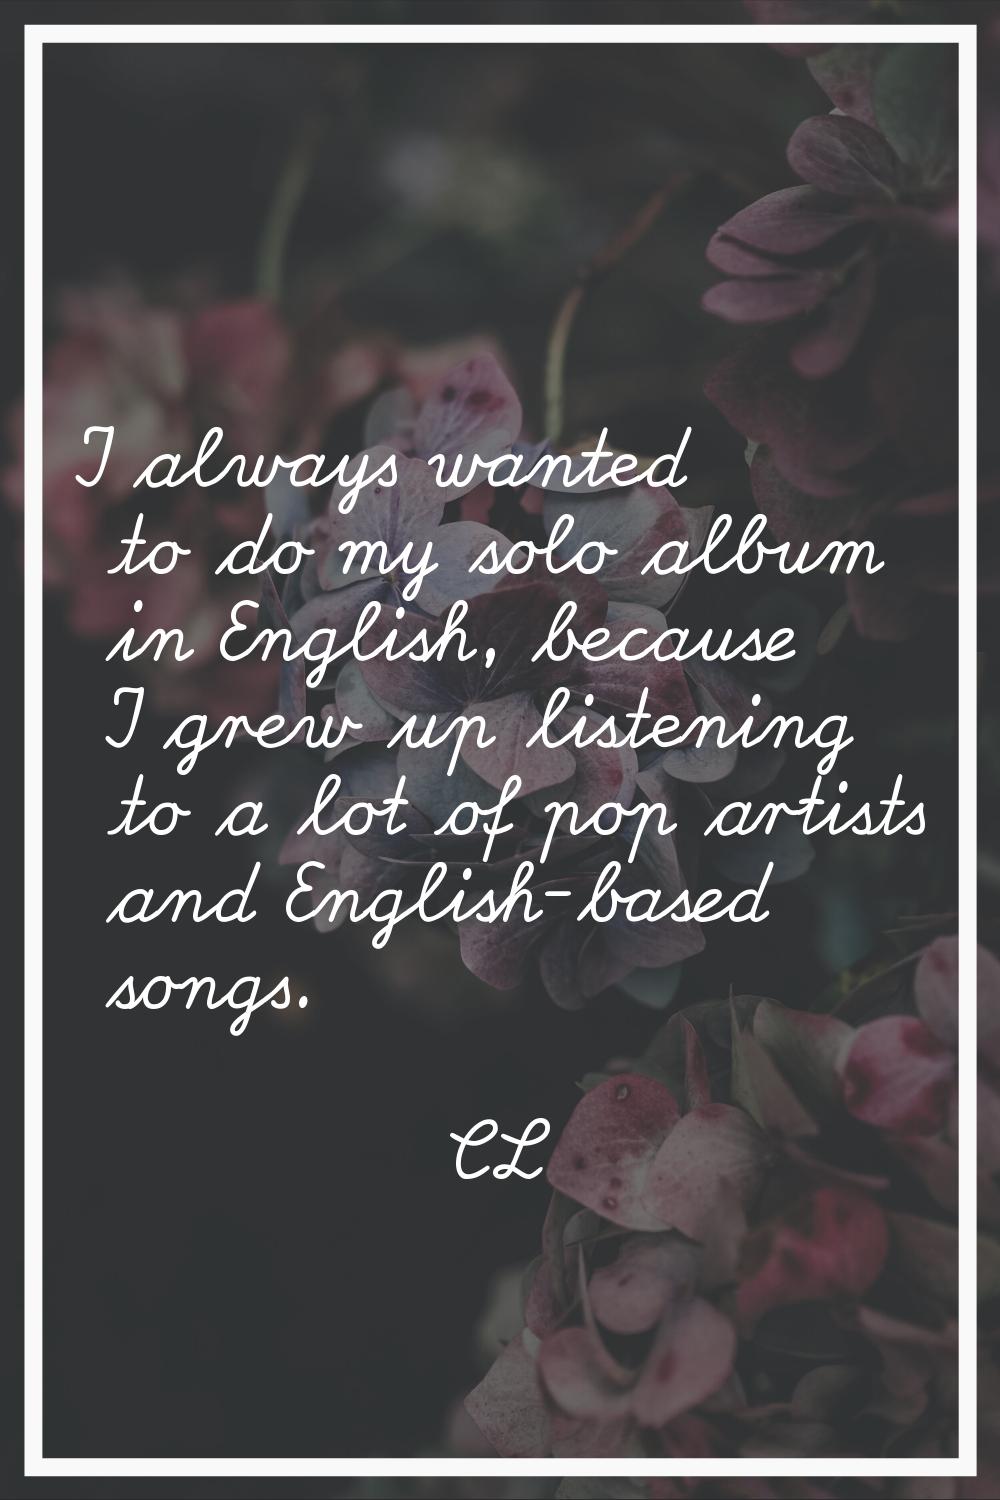 I always wanted to do my solo album in English, because I grew up listening to a lot of pop artists